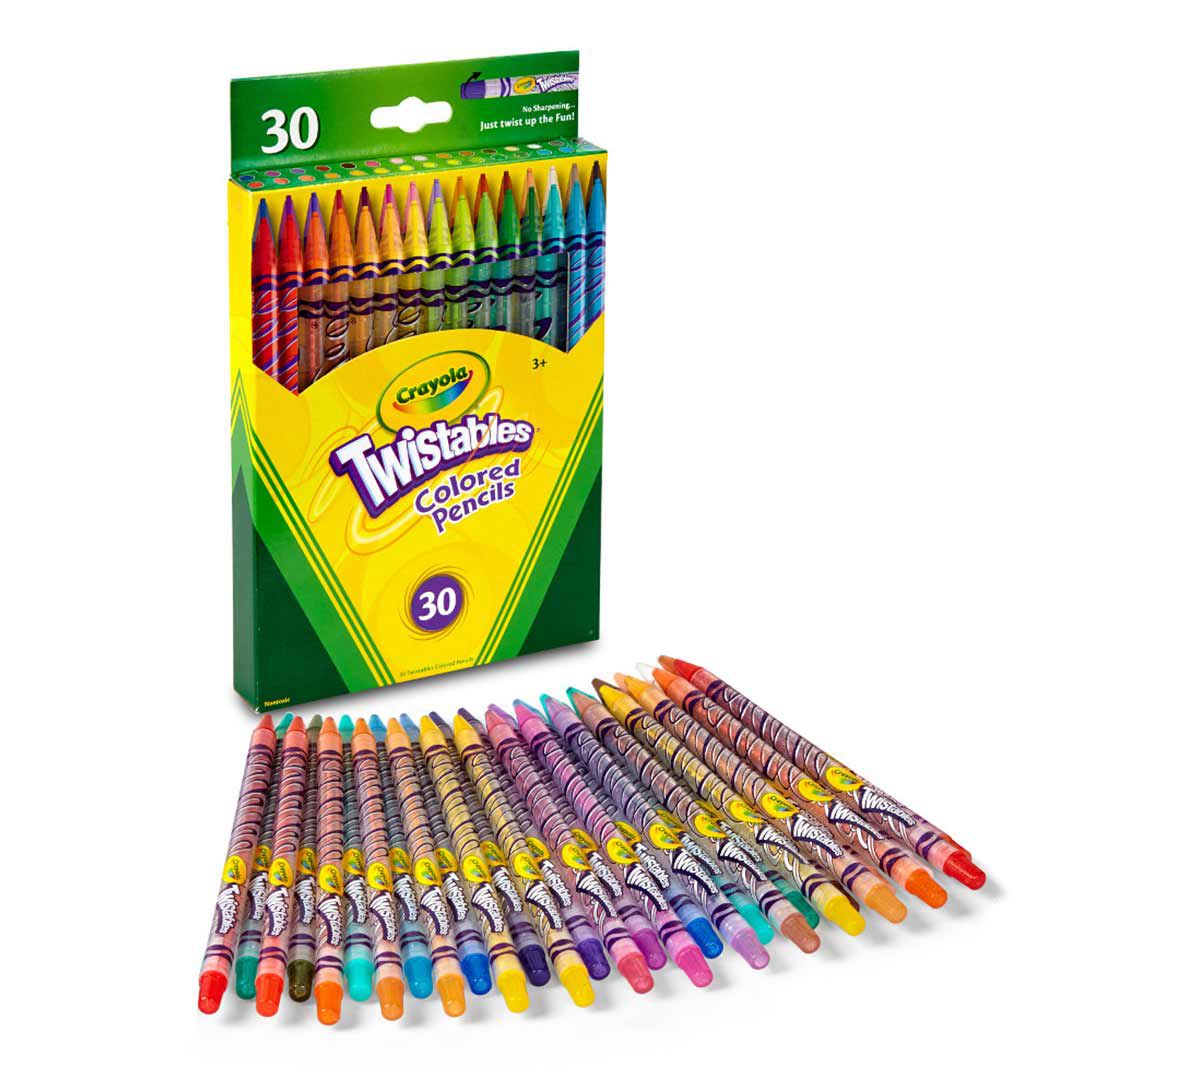 32 Pieces Glitter Colored Pencils Wood Bright Pencils Colorful Round Pencils wit 